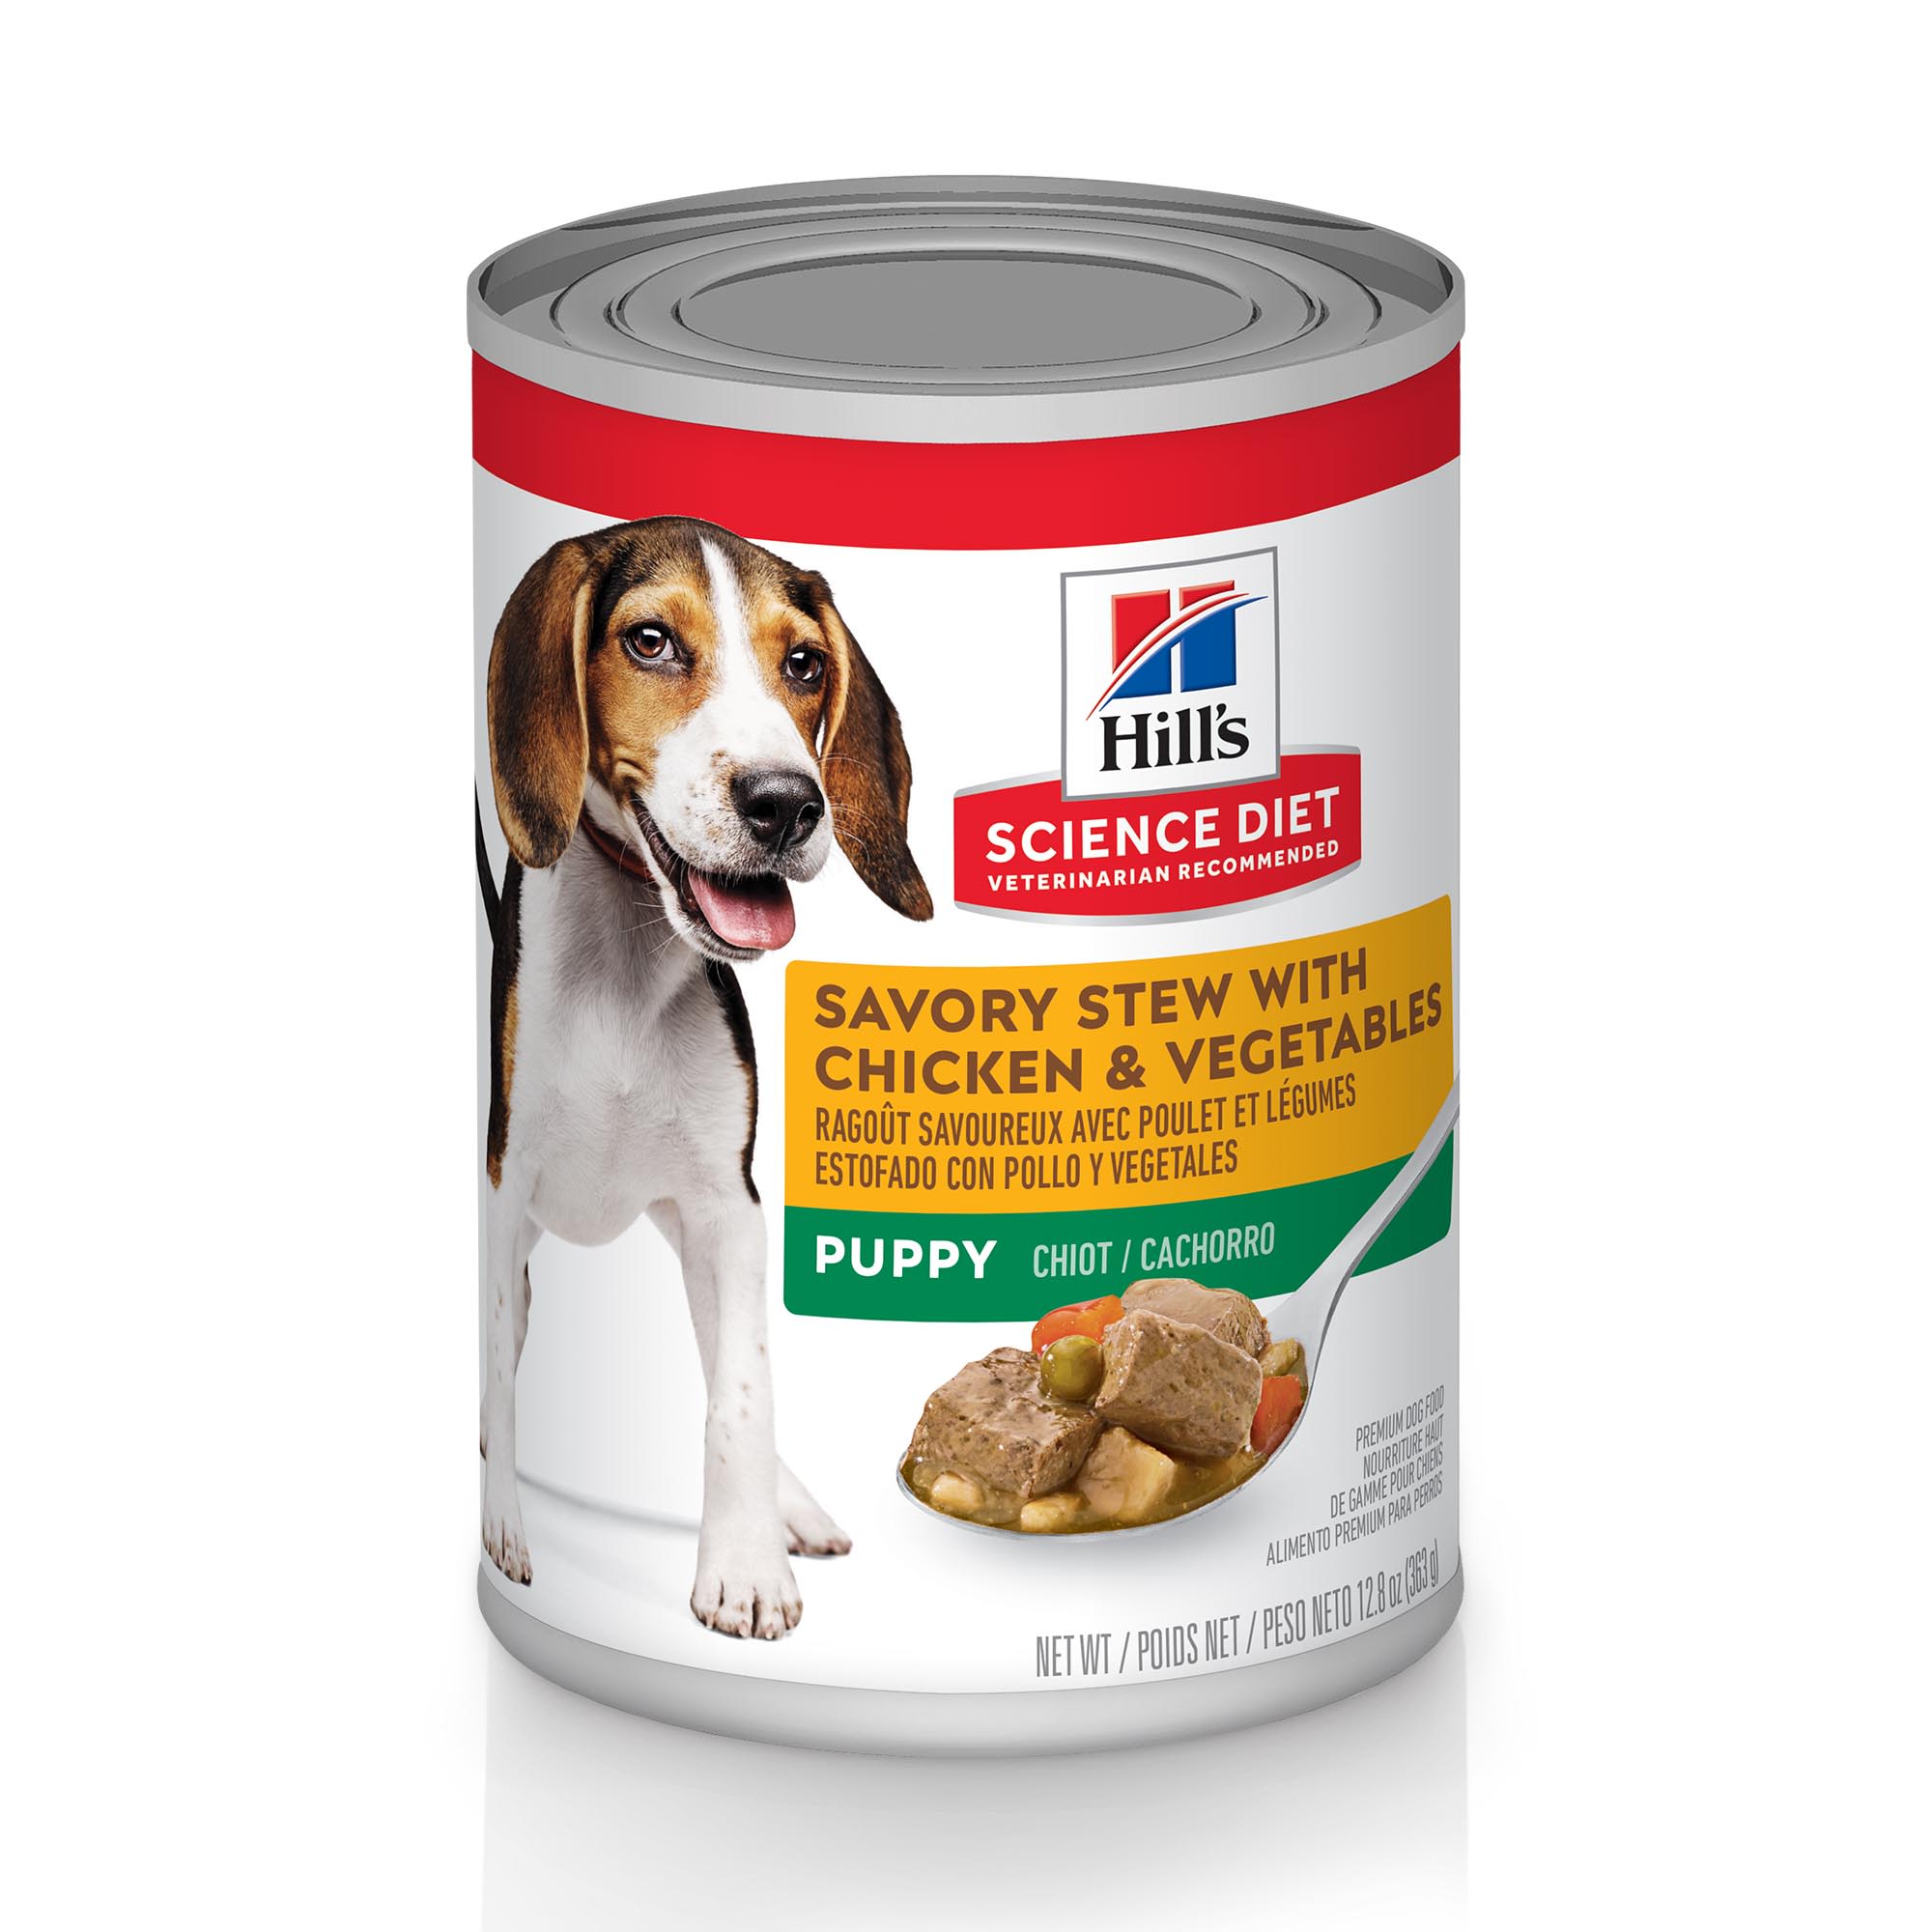 Photos - Dog Food Hills Hill's Hill's Science Diet Puppy Savory Stew with Chicken & Vegetables Can 